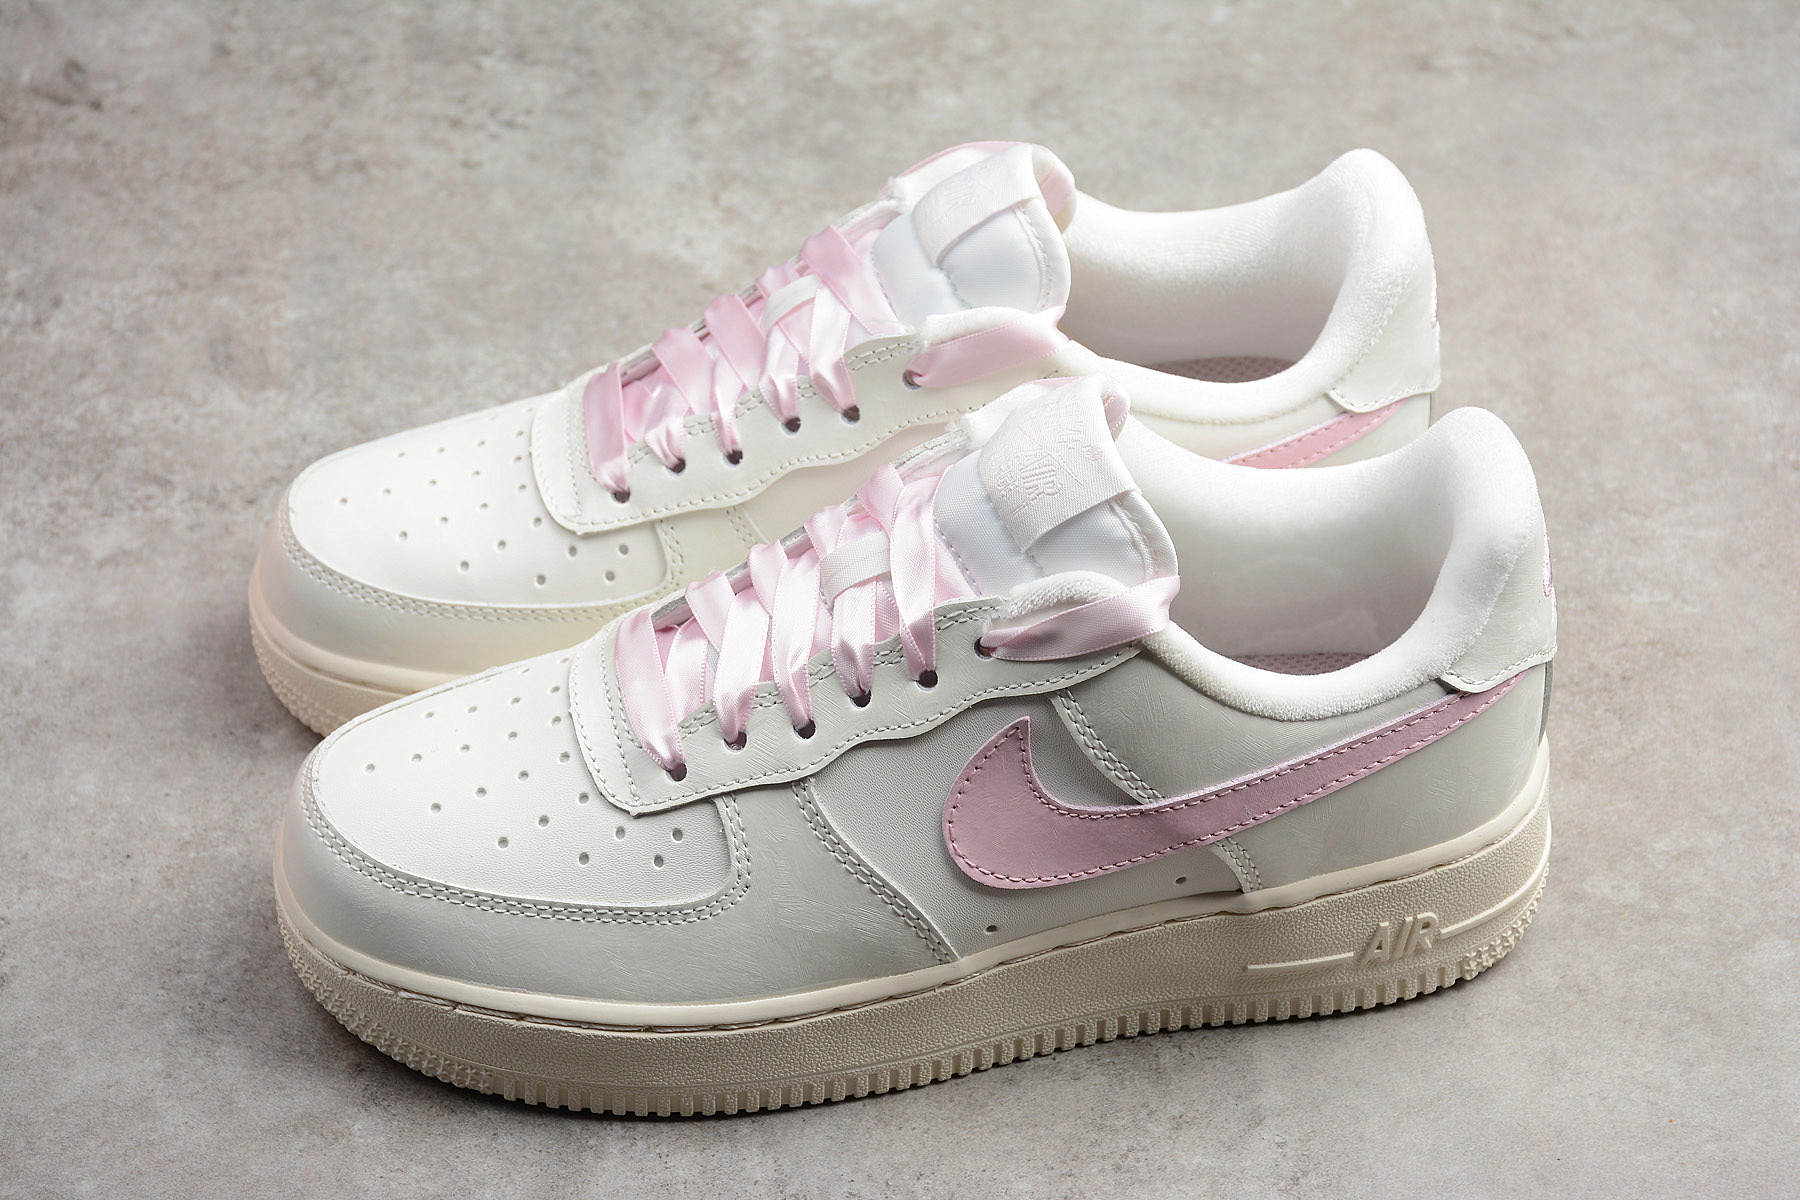 Women's Nike Air Force 1 Low GS Sail Artic Pink 314219-130